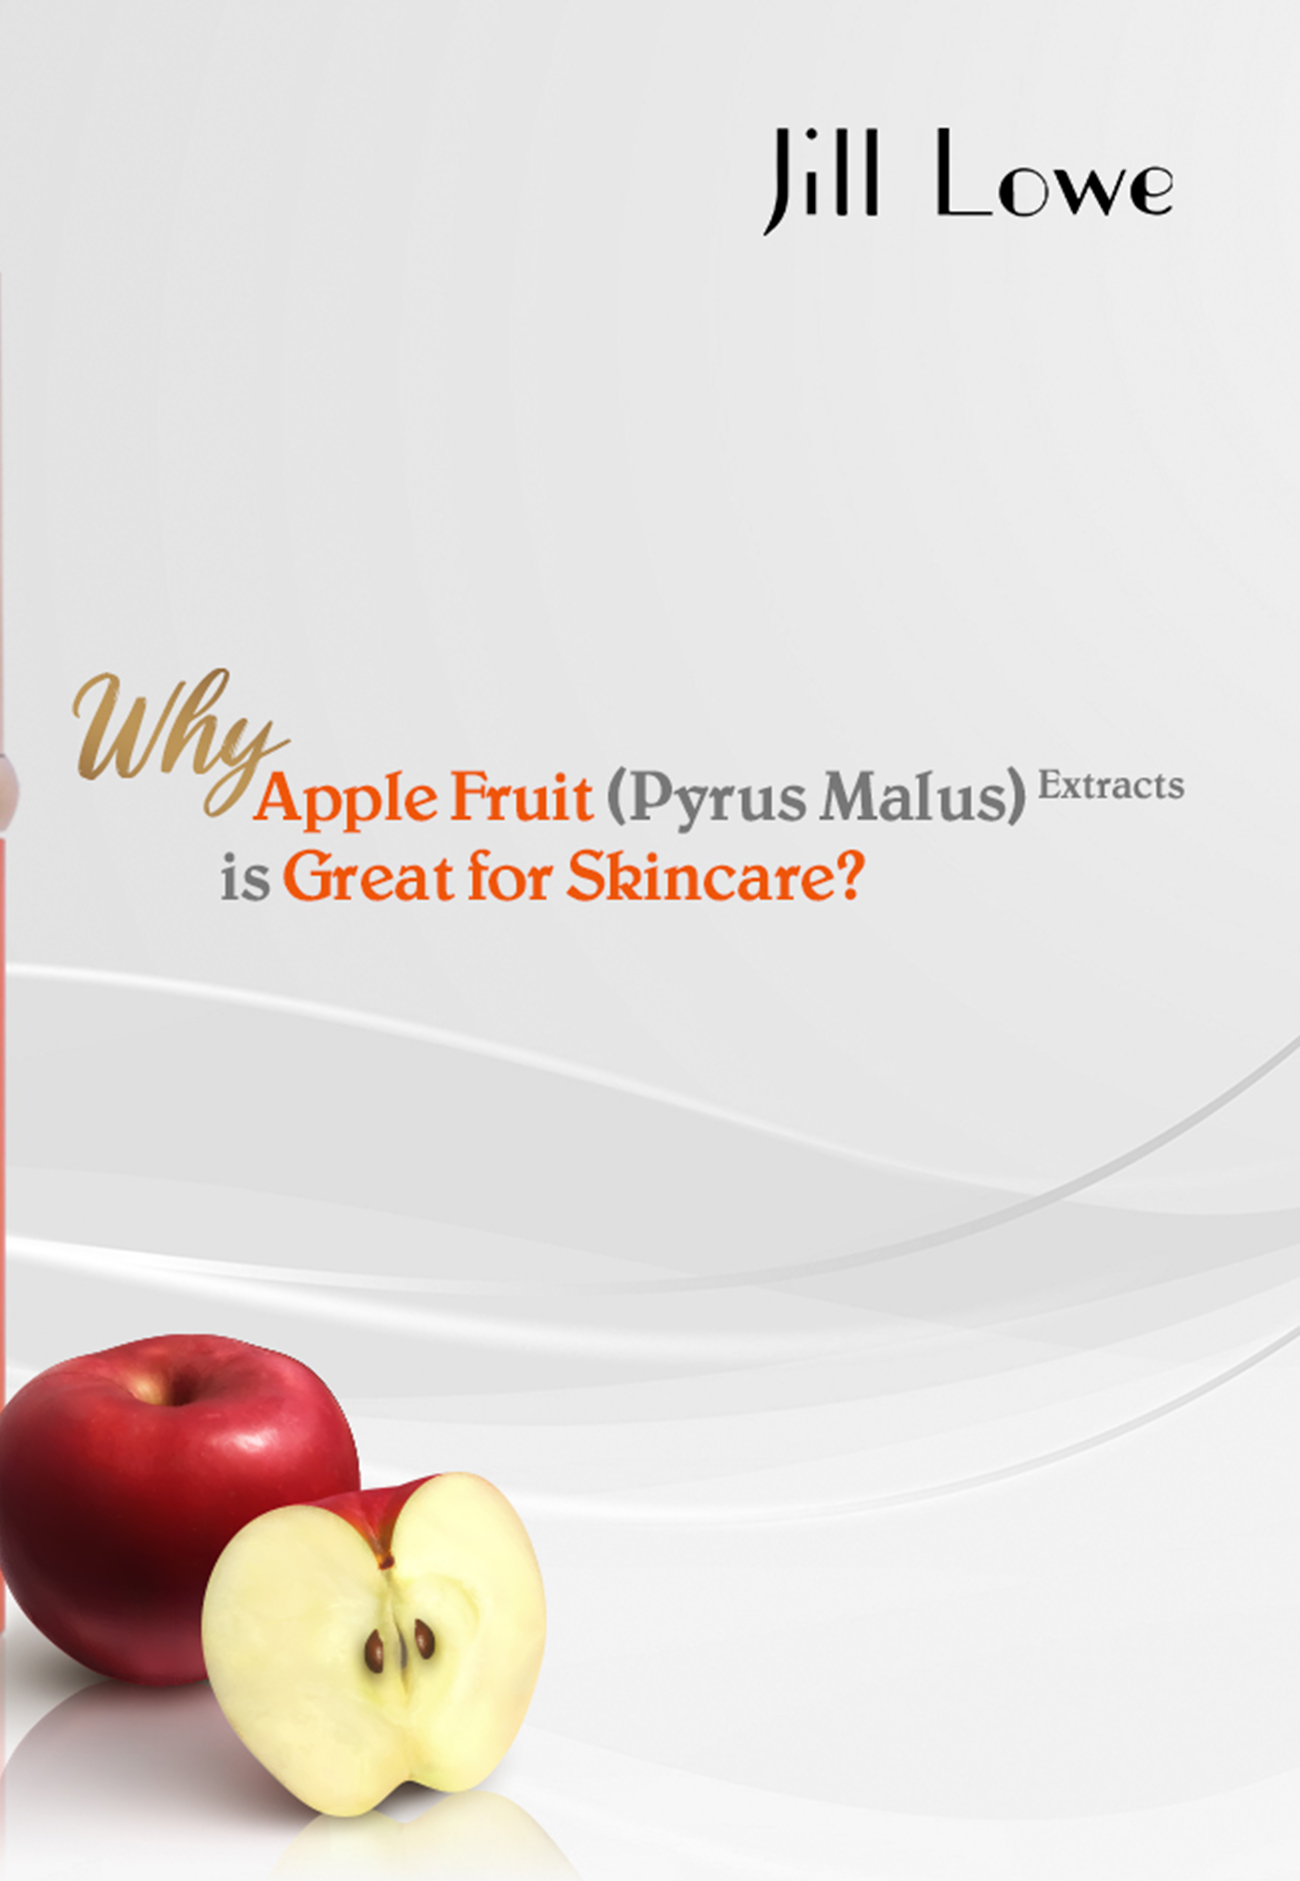 Why Apple Fruit (Pyrus Malus) Extracts is Great for Skincare?